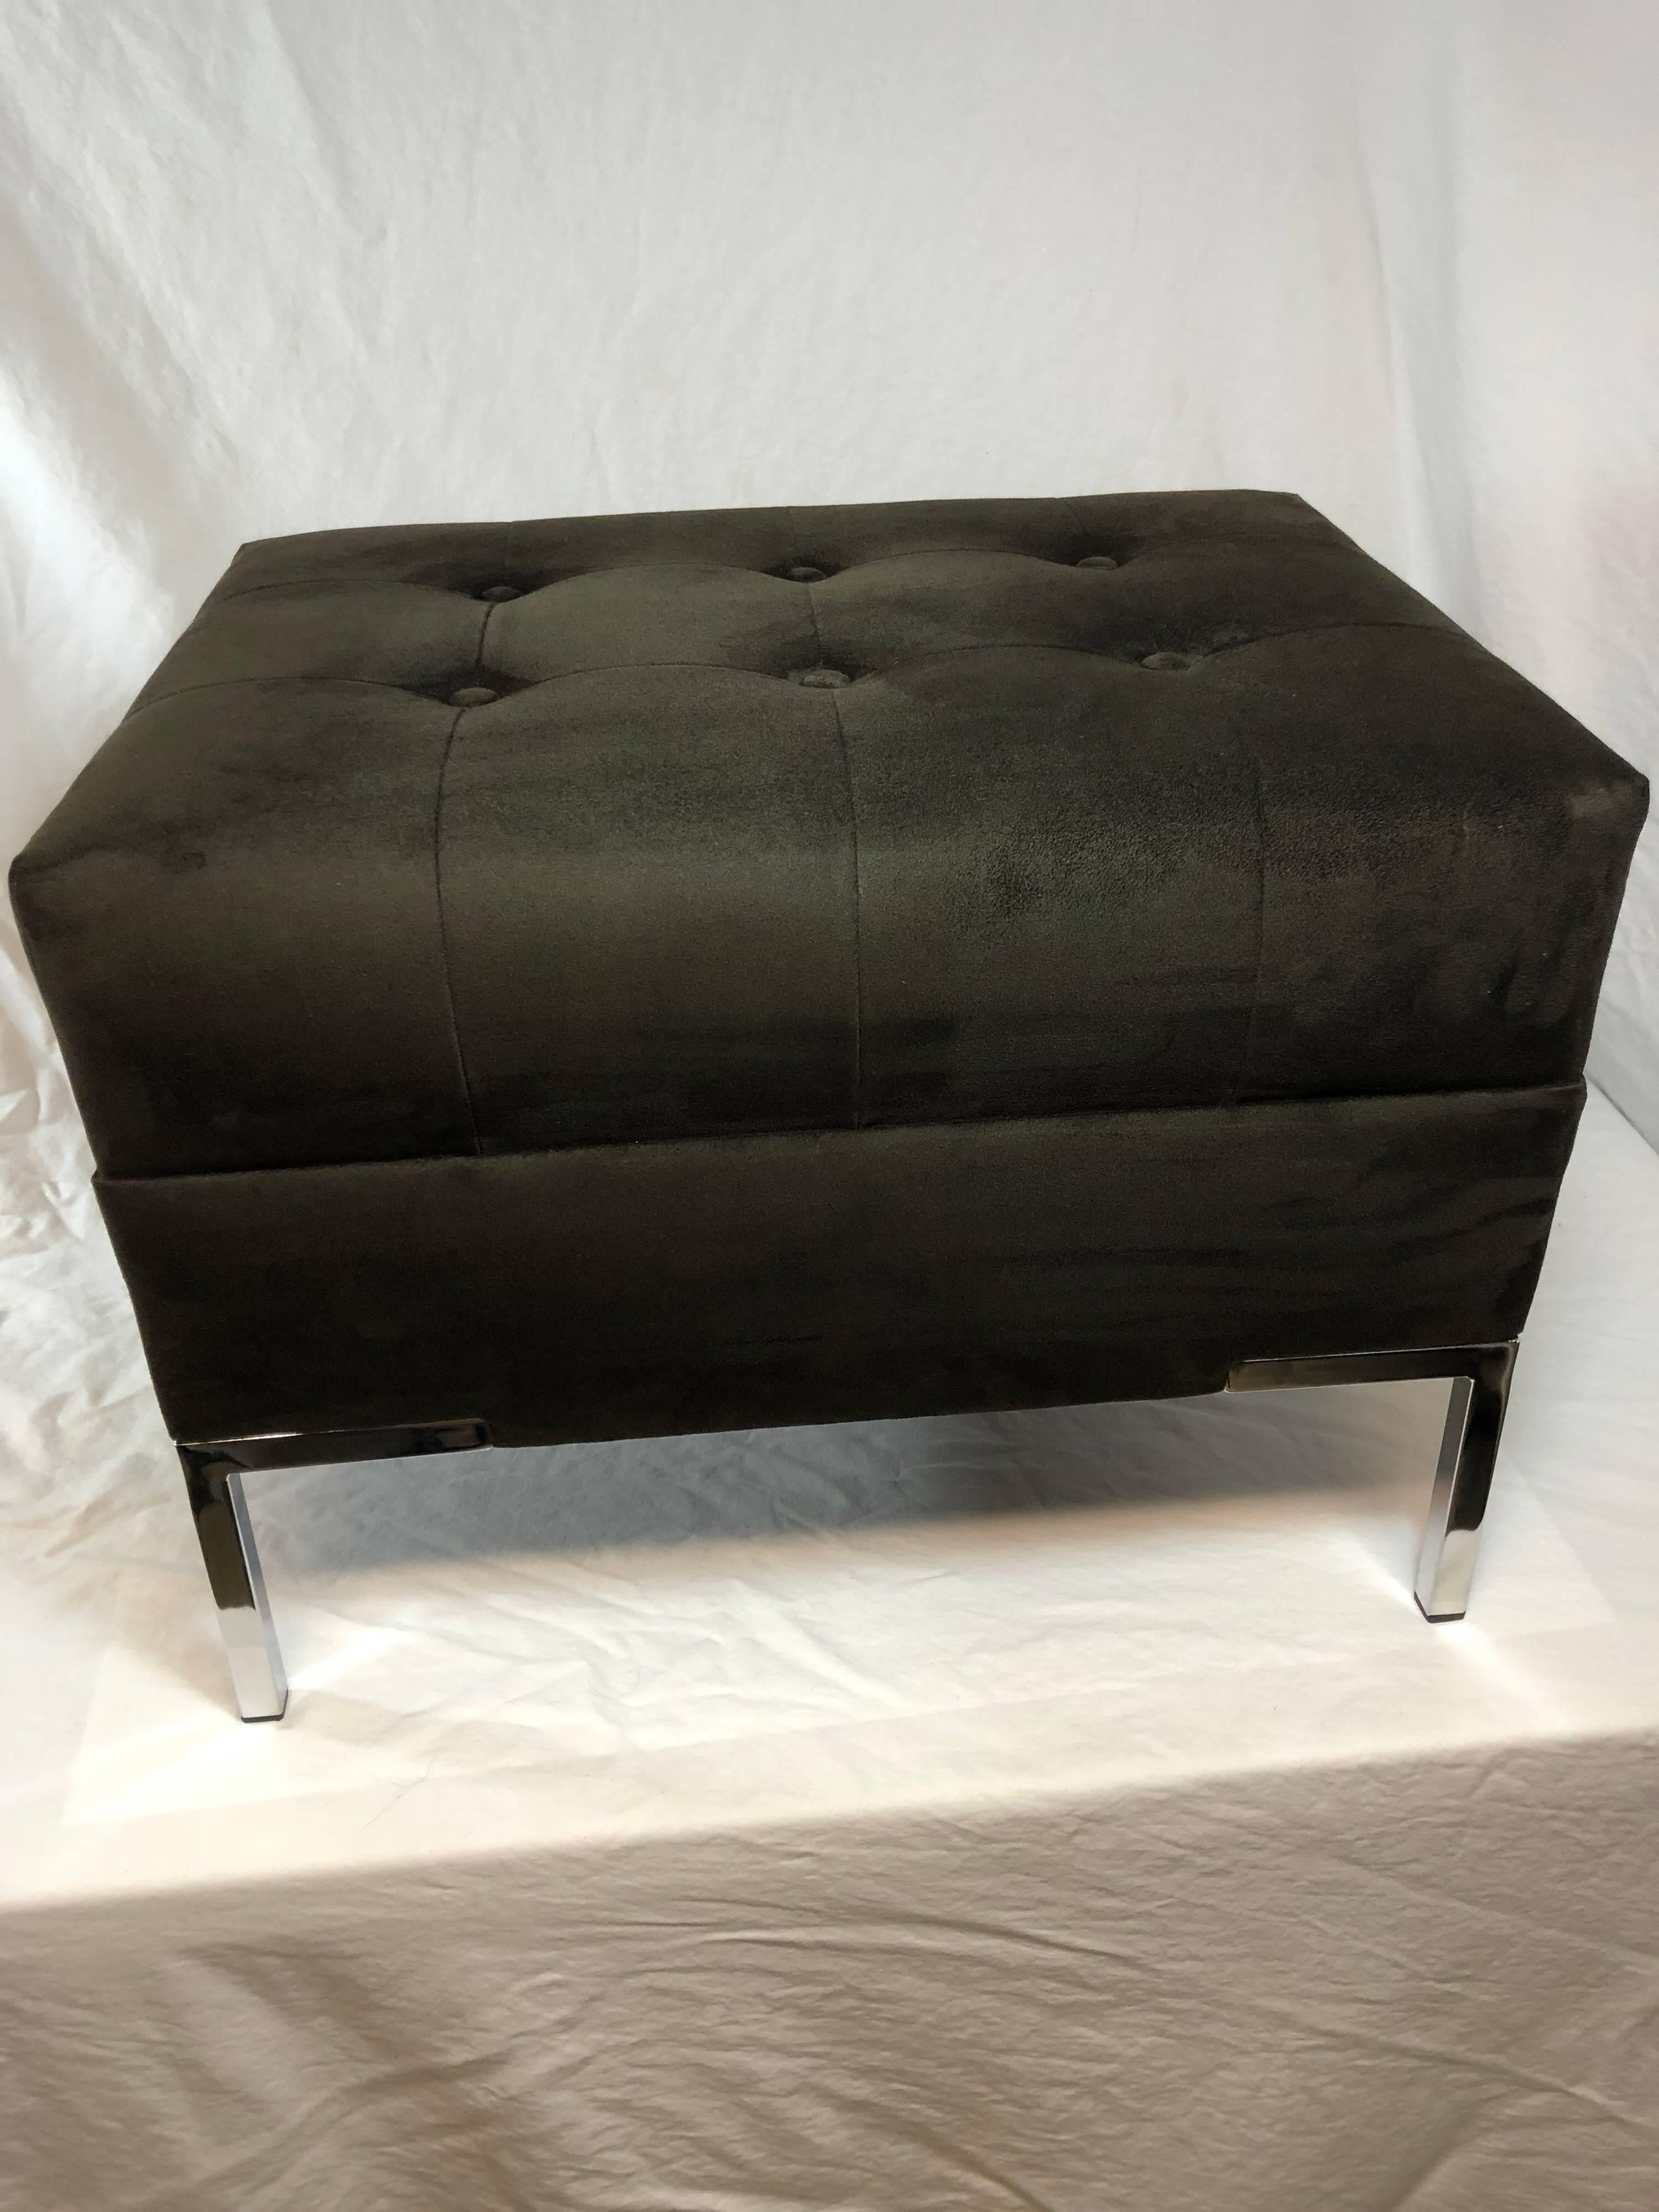 Pair of custom upholstered integrated leg Mondrian benches. Shown is rich chocolate brown velvet, with buttons and seaming. Available in any size custom-made to order COM / COL. Legs can be brass, nickel or chrome can be bought in pairs or as a